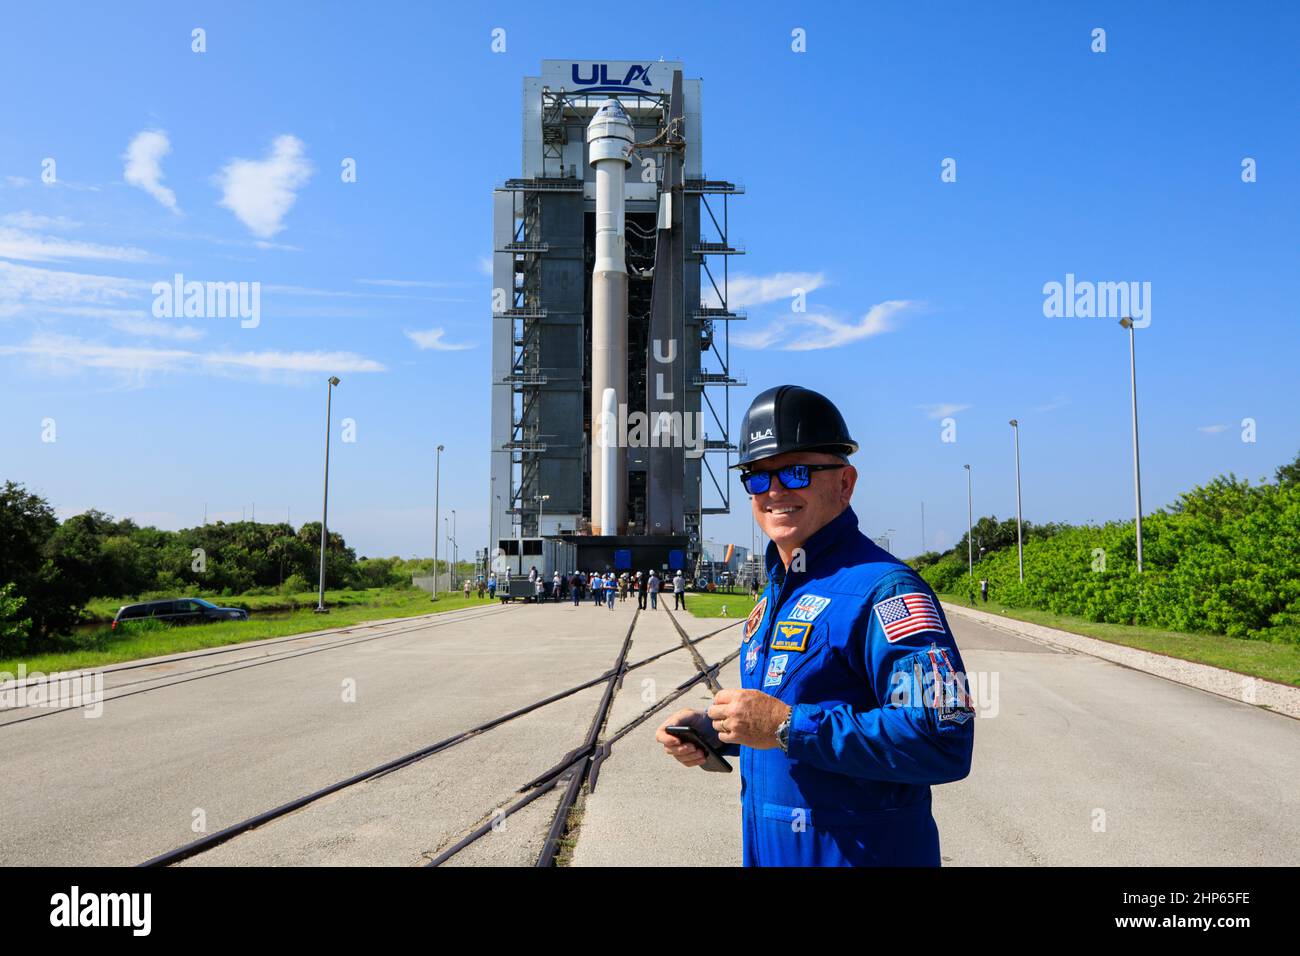 Barry “Butch” Wilmore, NASA astronaut, Crew Flight Test, watches as Boeing’s CST-100 Starliner spacecraft and the United Launch Alliance Atlas V rocket is rolled out of the Vertical Integration Facility to the launch pad at Space Launch Complex-41 on July 29, 2021, at Cape Canaveral Space Force Station in Florida. Starliner will launch on the Atlas V for Boeing’s second uncrewed Orbital Flight Test (OFT-2) for NASA’s Commercial Crew Program. OFT-2 is an important uncrewed mission designed to test the end-to-end capabilities of the new system for NASA’s Commercial Crew Program. Stock Photo